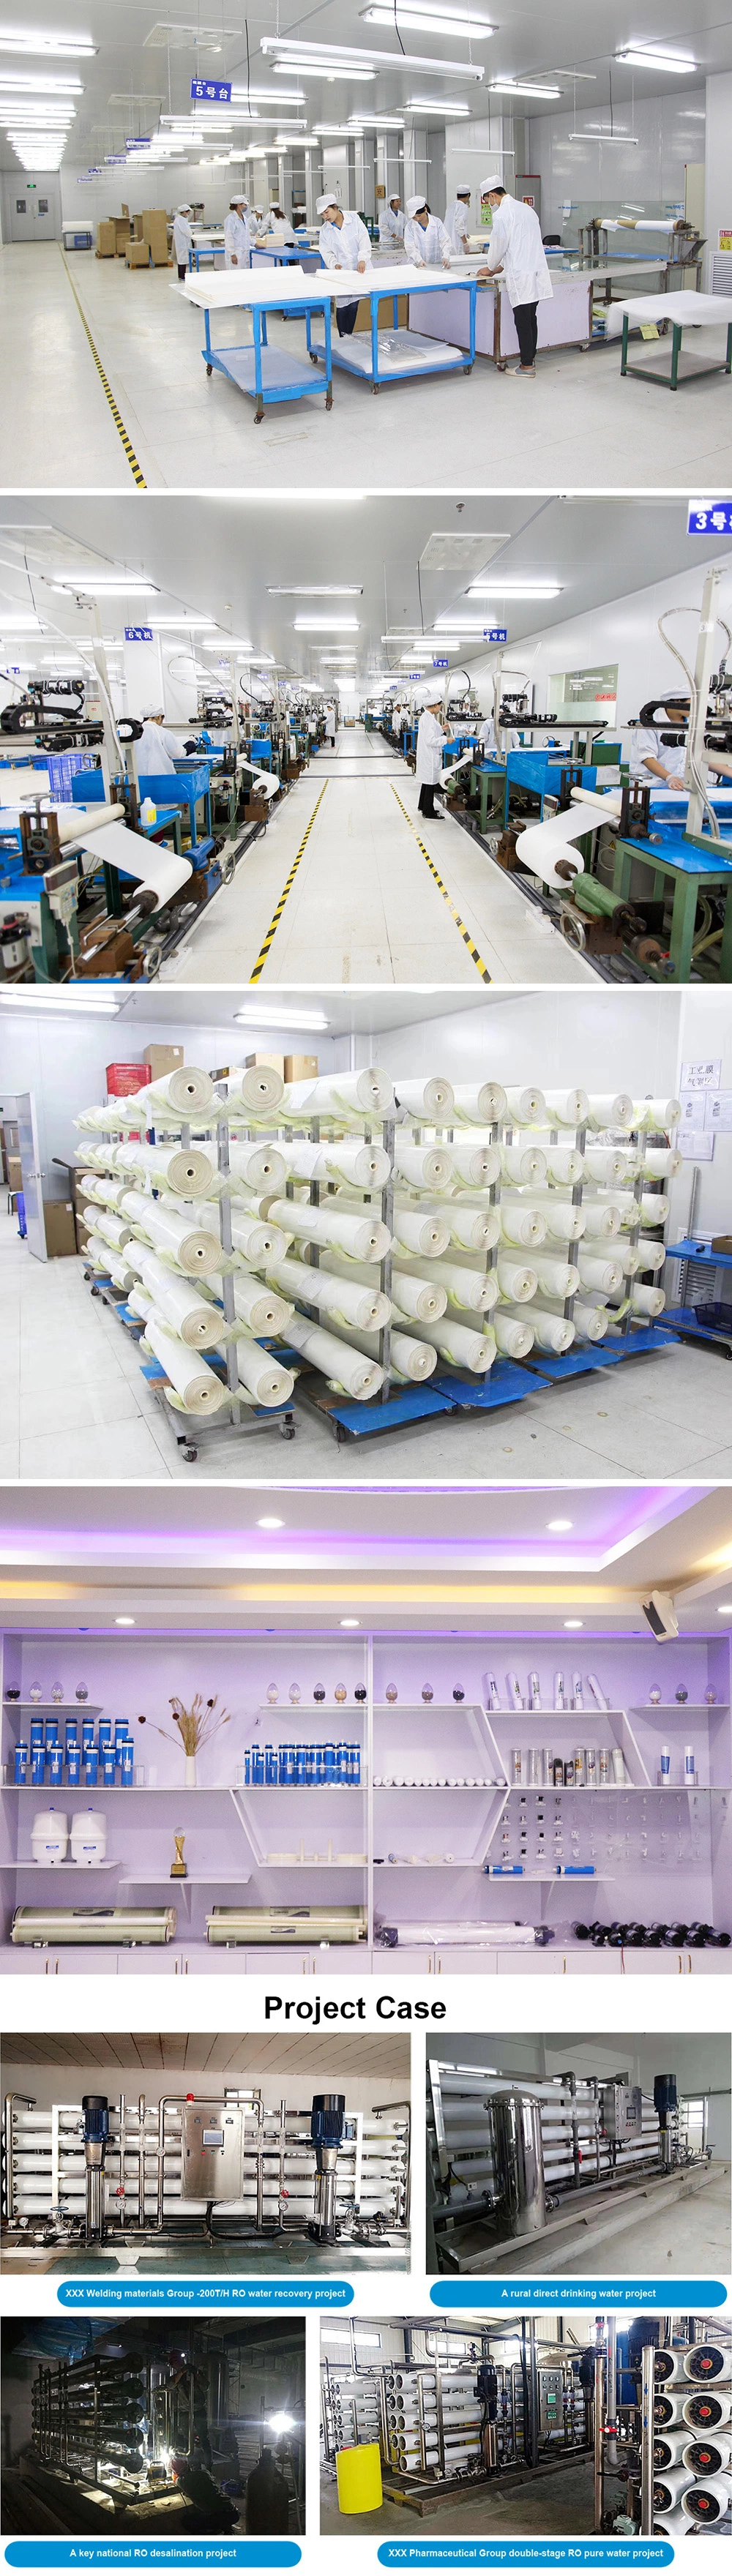 Hikins Reverse Osmosis Element Water Filters RO Membrane Manufacturers